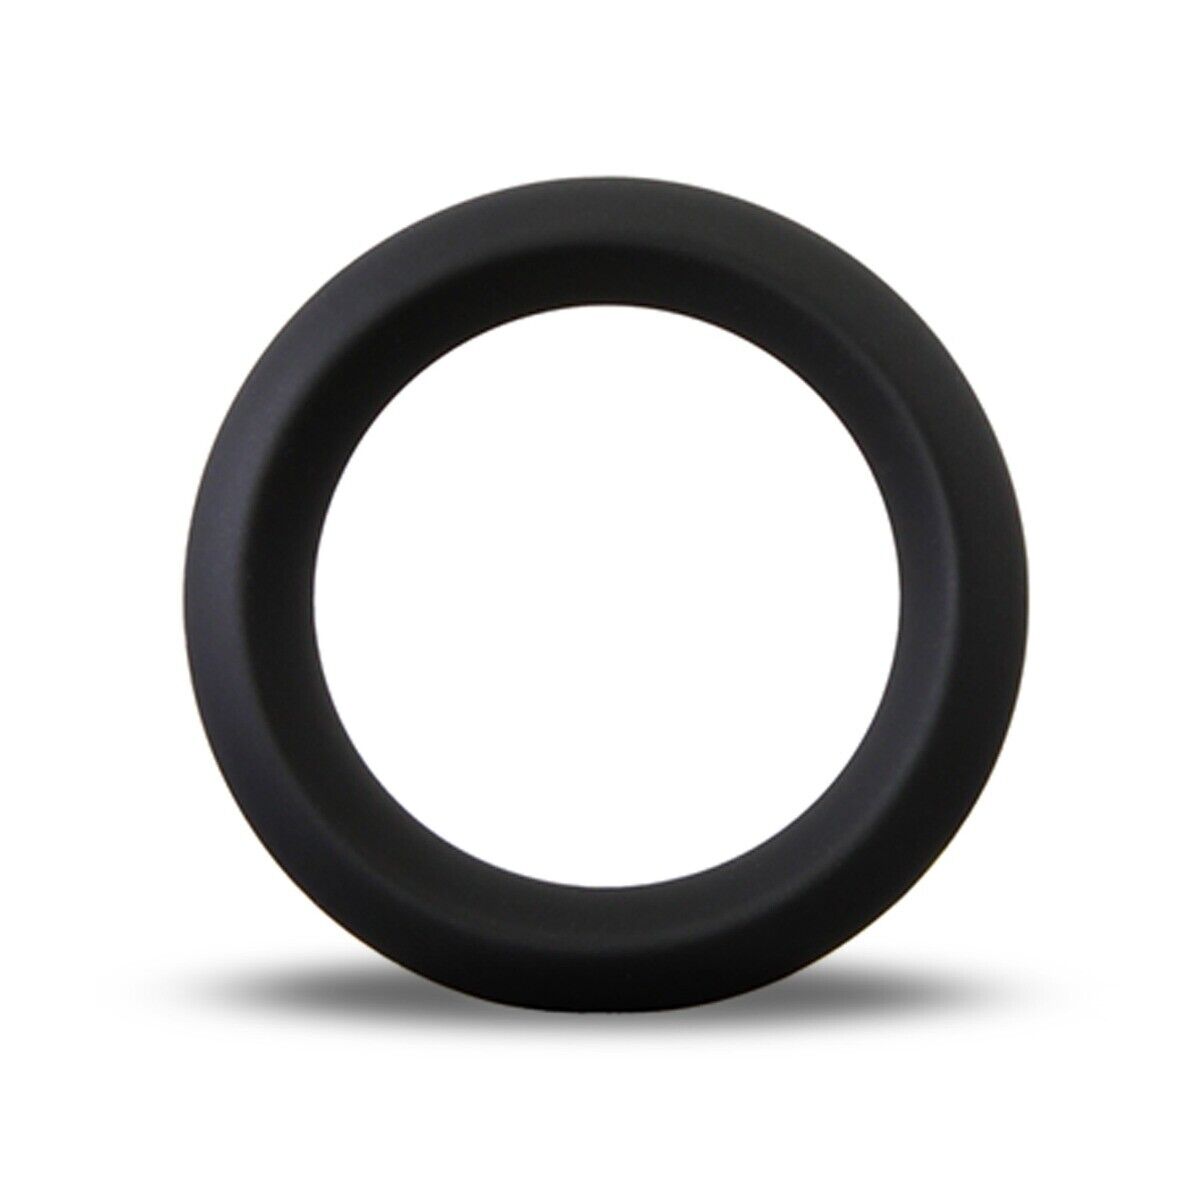 Stretchy Silicone Thick Penis Cock Ring Band Delay Prolong Sex Toys for Men